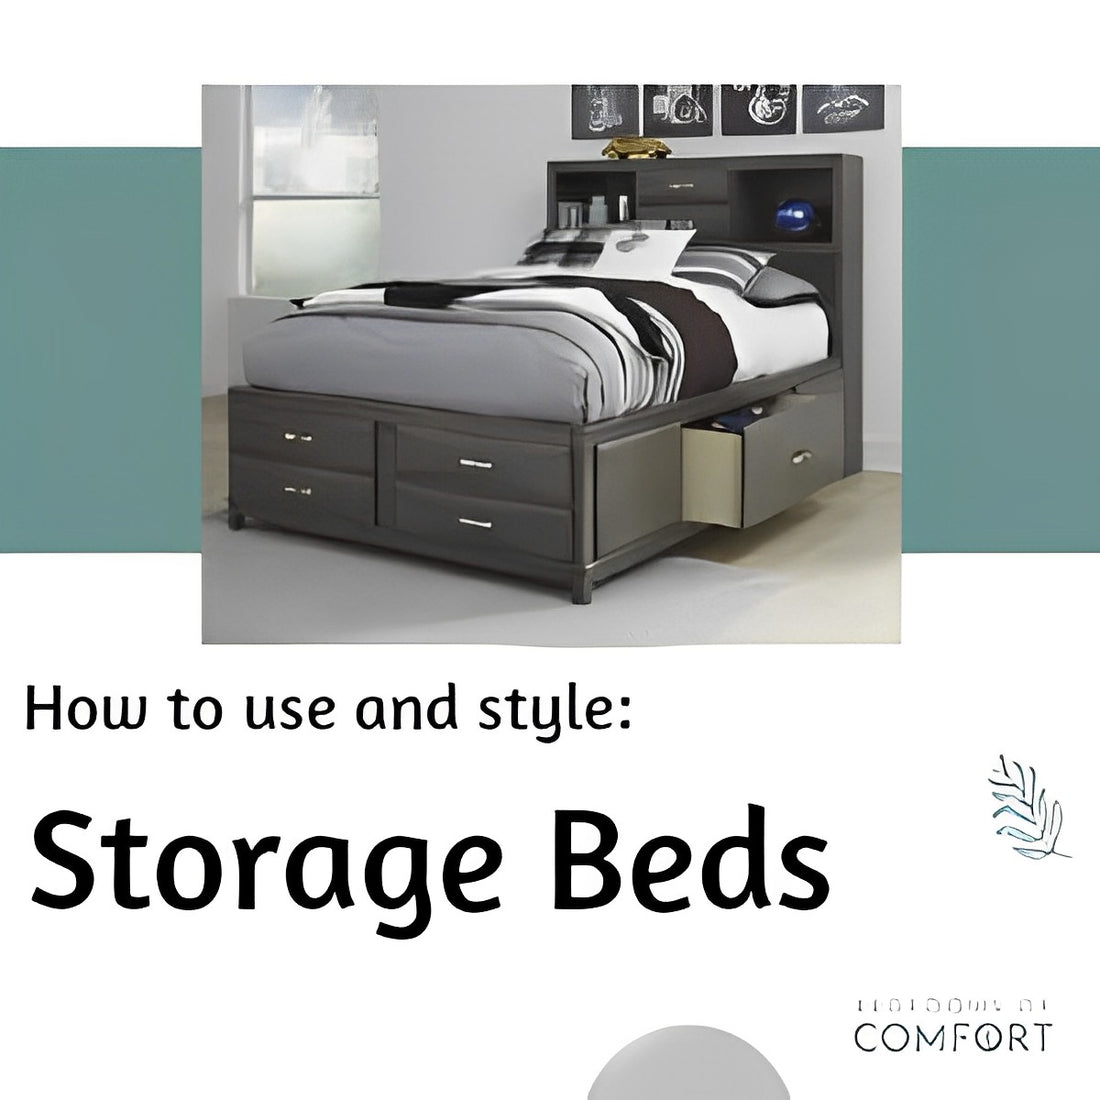 How to use and style Storage Beds